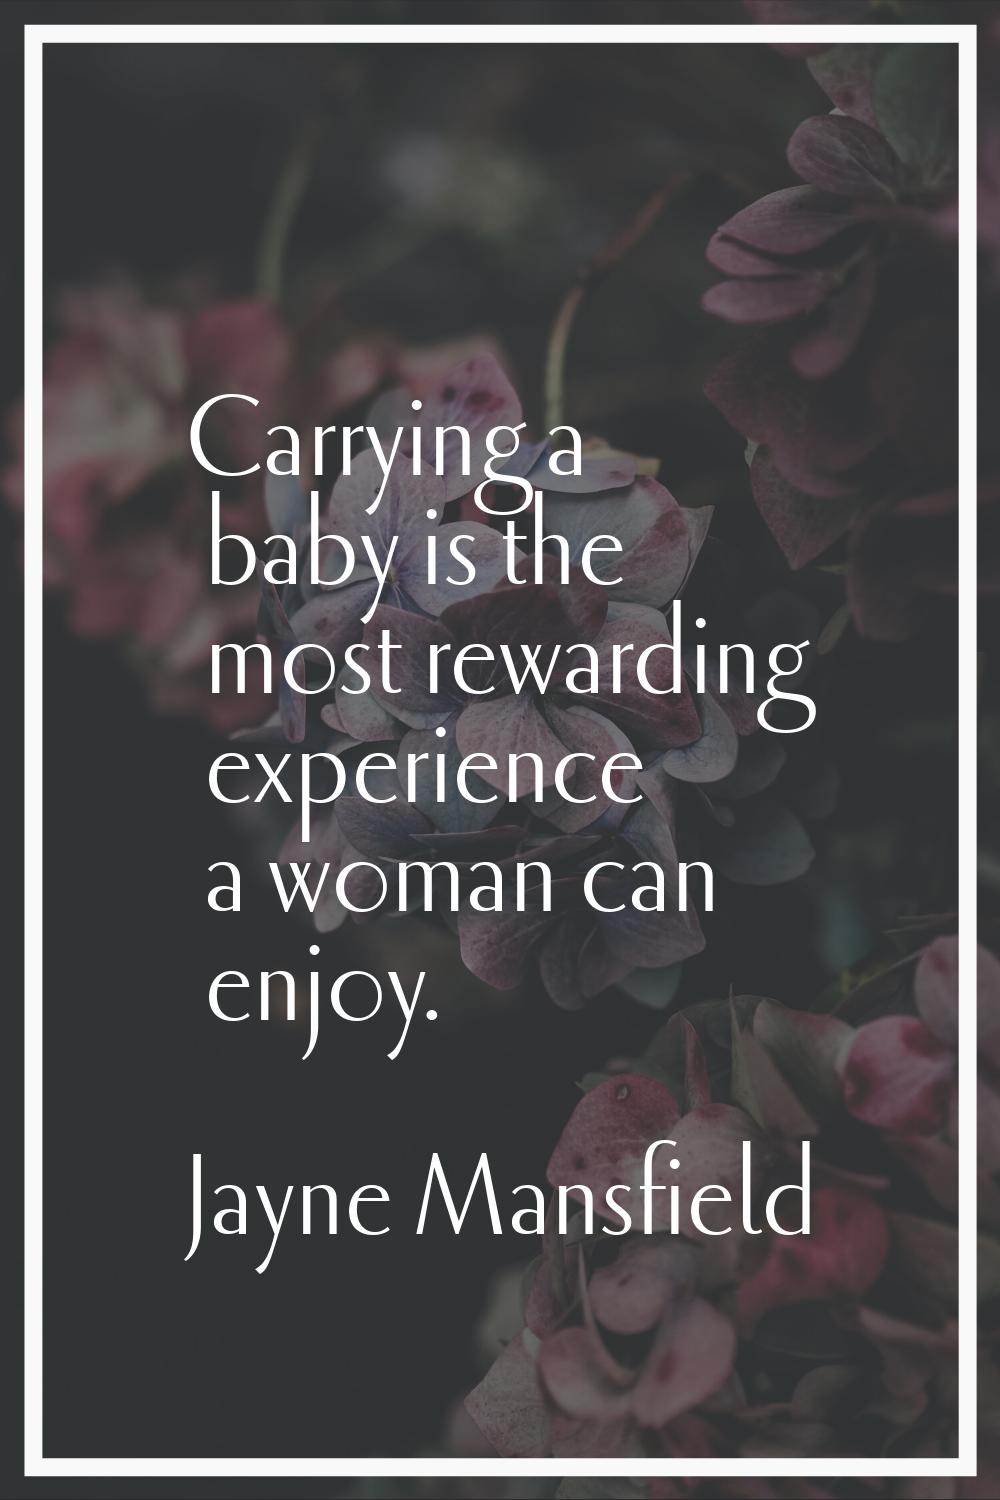 Carrying a baby is the most rewarding experience a woman can enjoy.